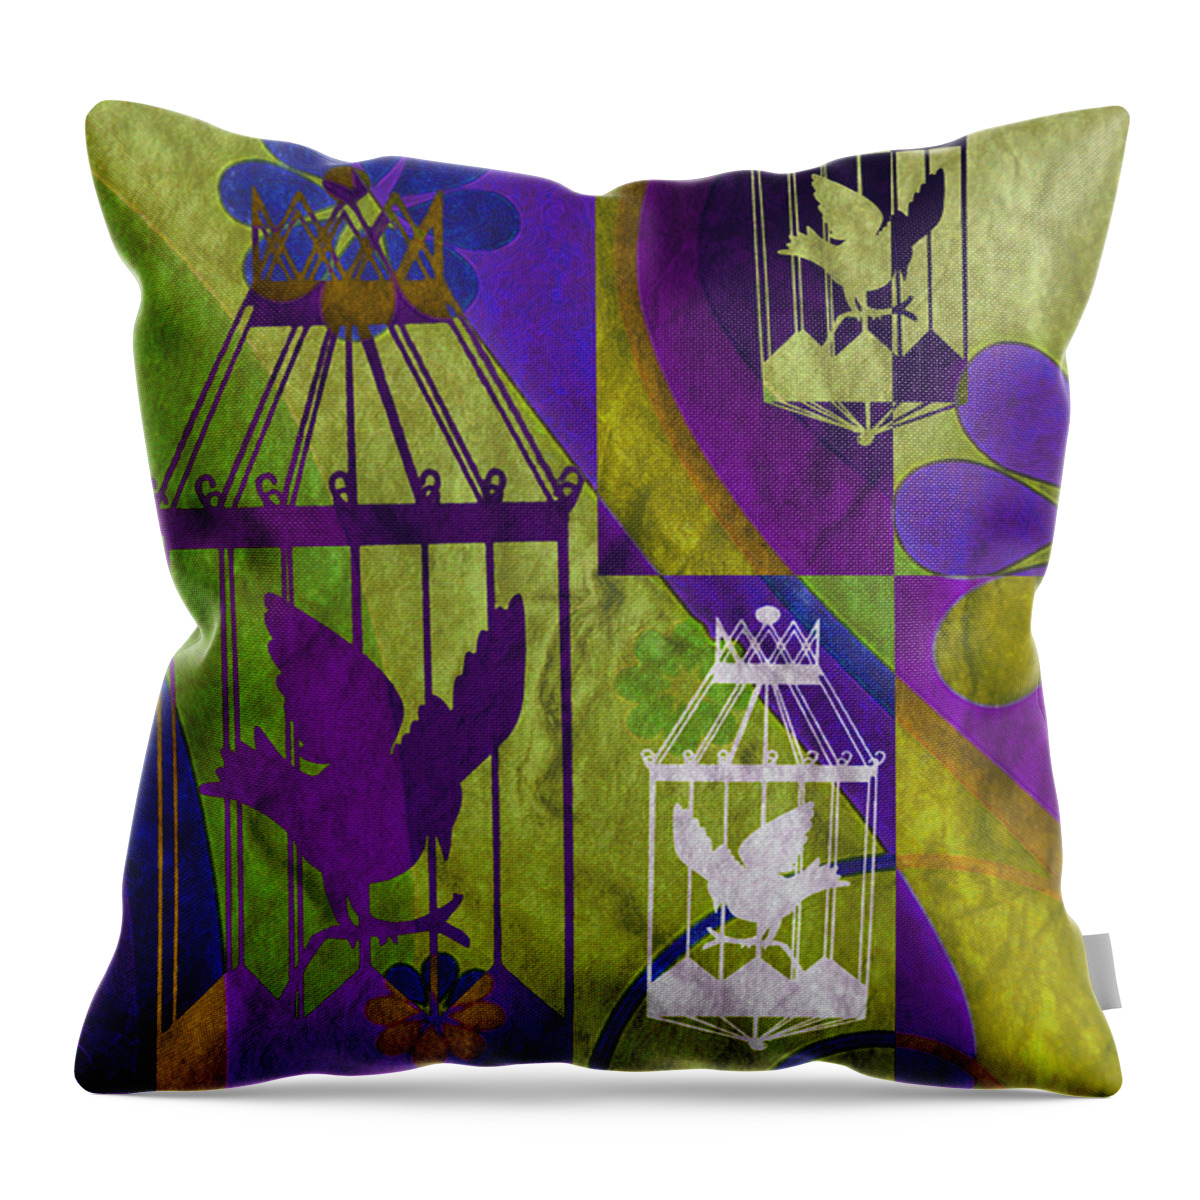 Silhouette Throw Pillow featuring the mixed media 3 Caged Birds by Angelina Tamez